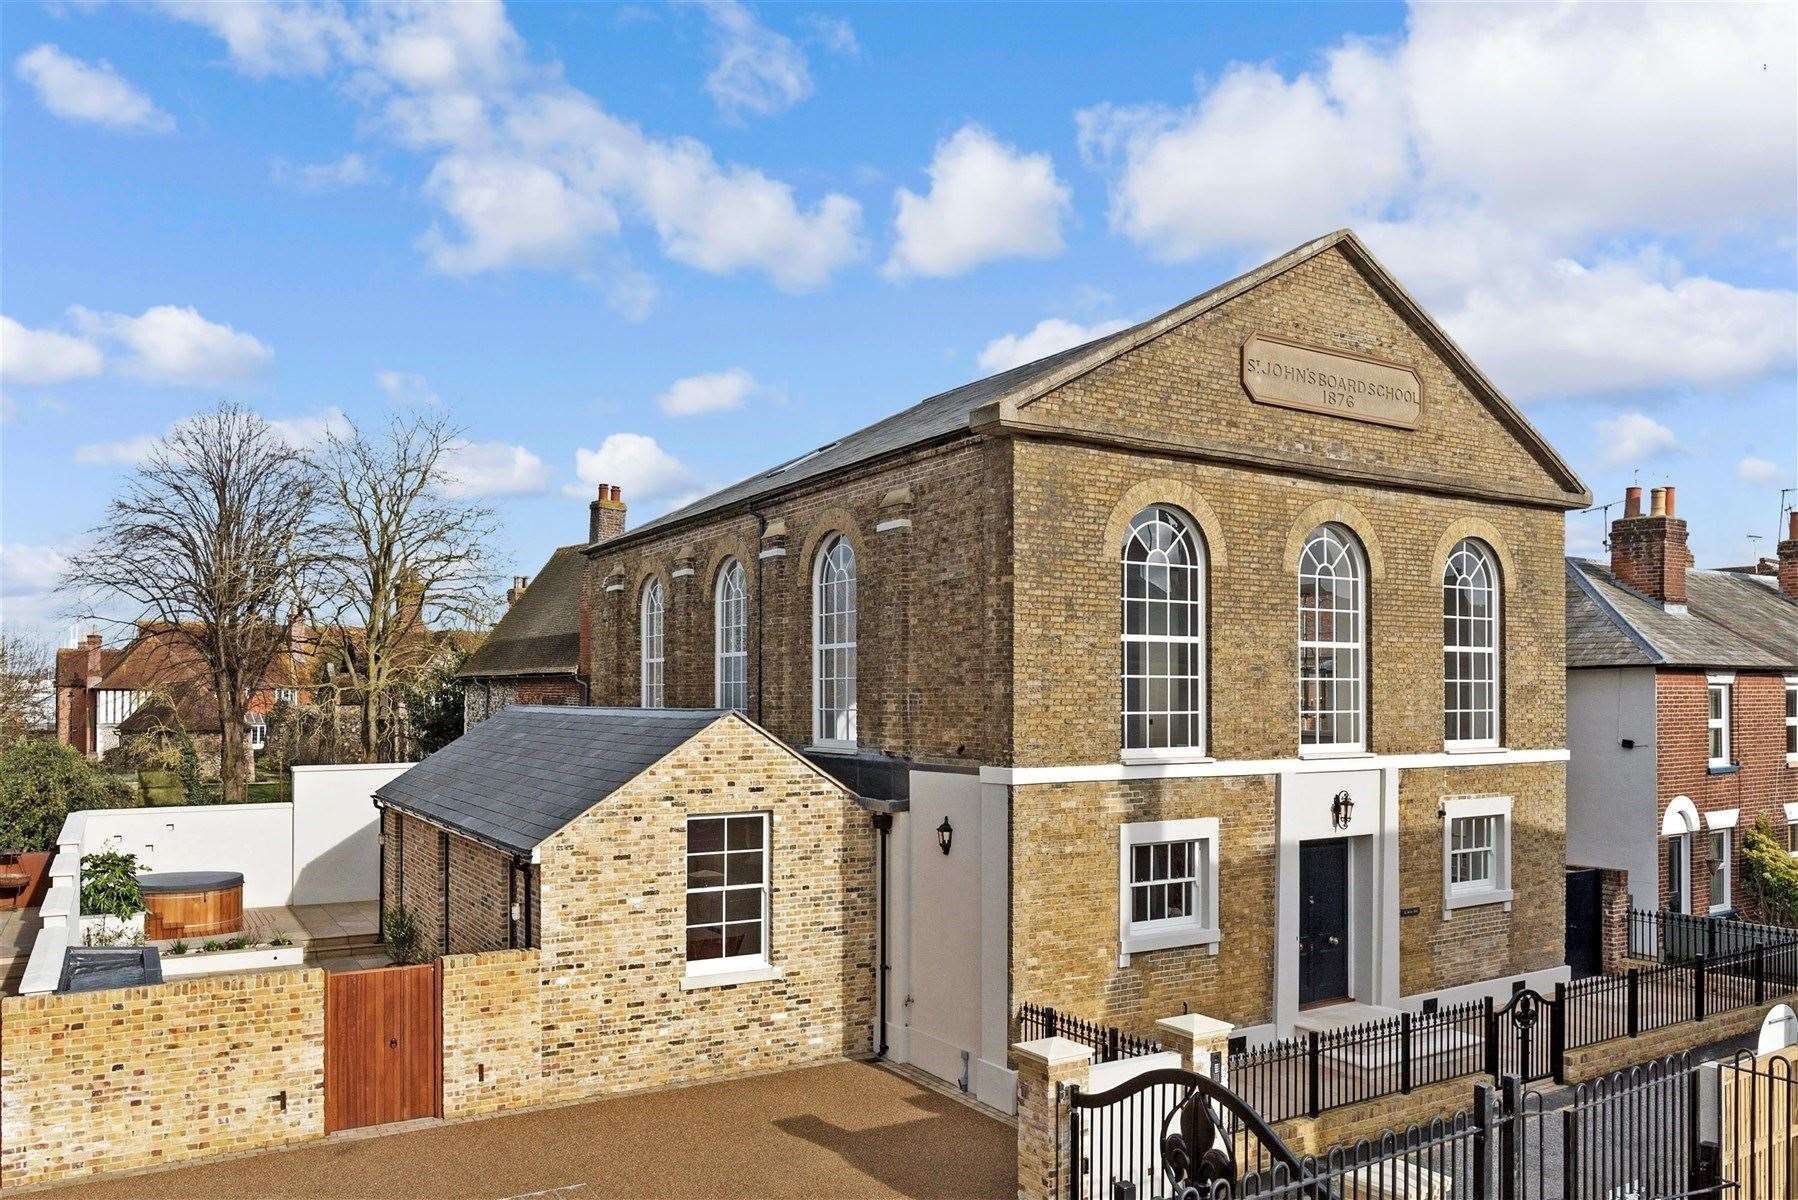 Former derelict building is now a £2m house for sale in Canterbury. Picture: Wards